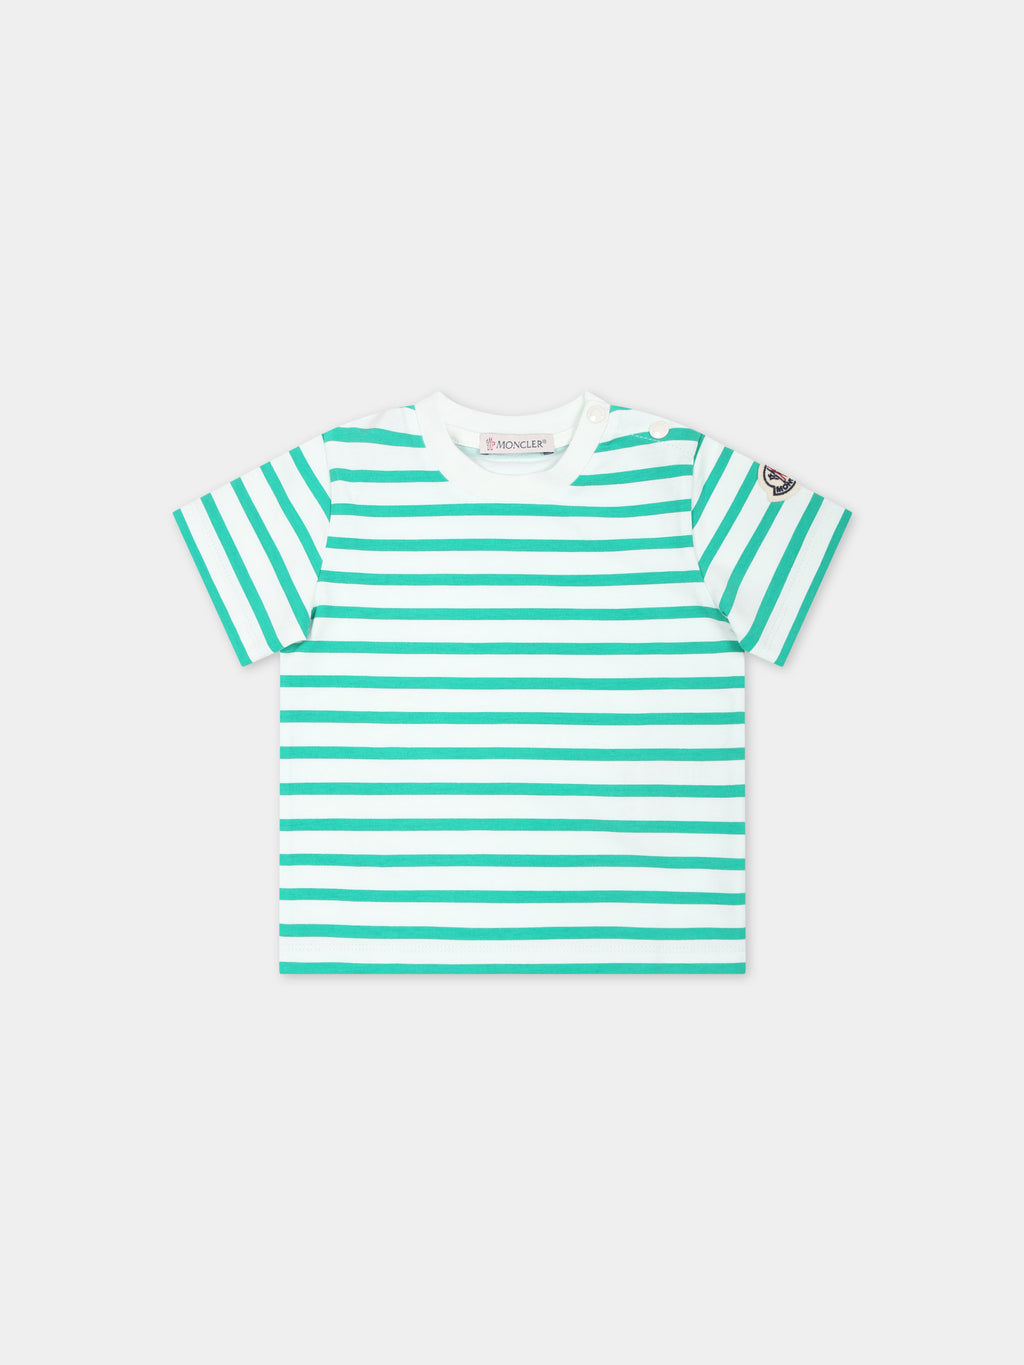 Green t-shirt for baby boy with logo